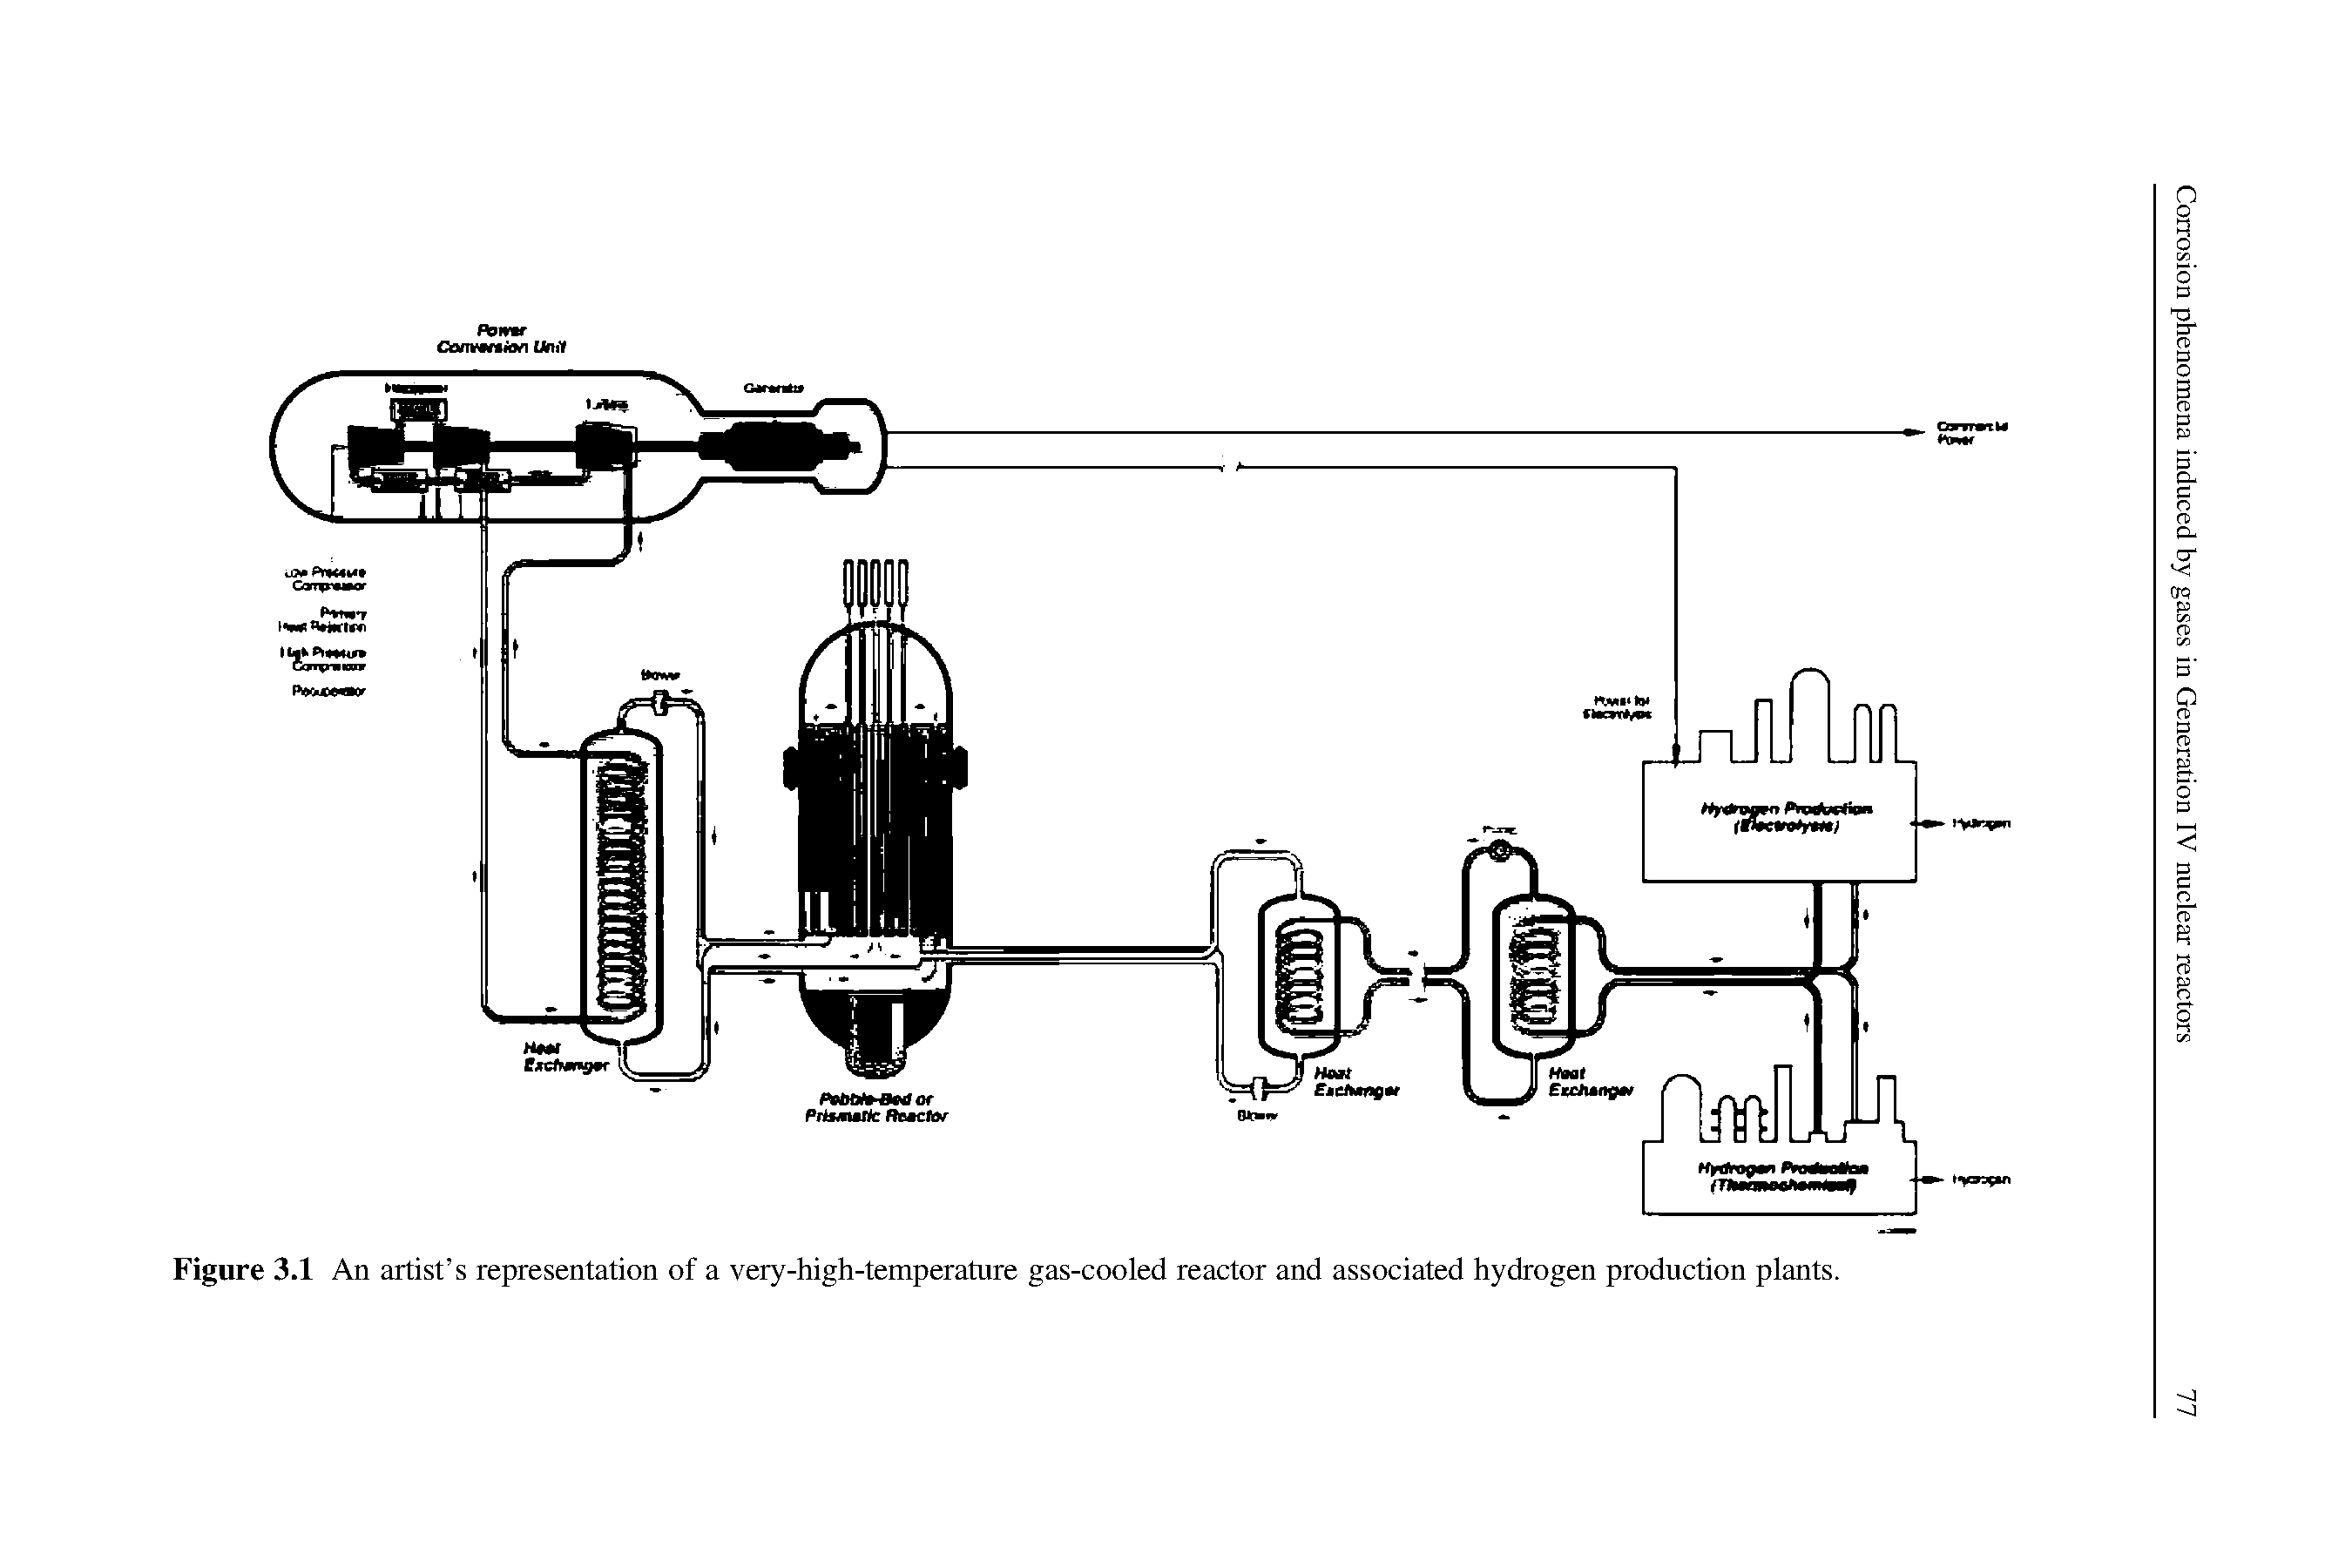 Figure 3.1 An artist s representation of a very-high-temperature gas-cooled reactor and associated hydrogen production plants.